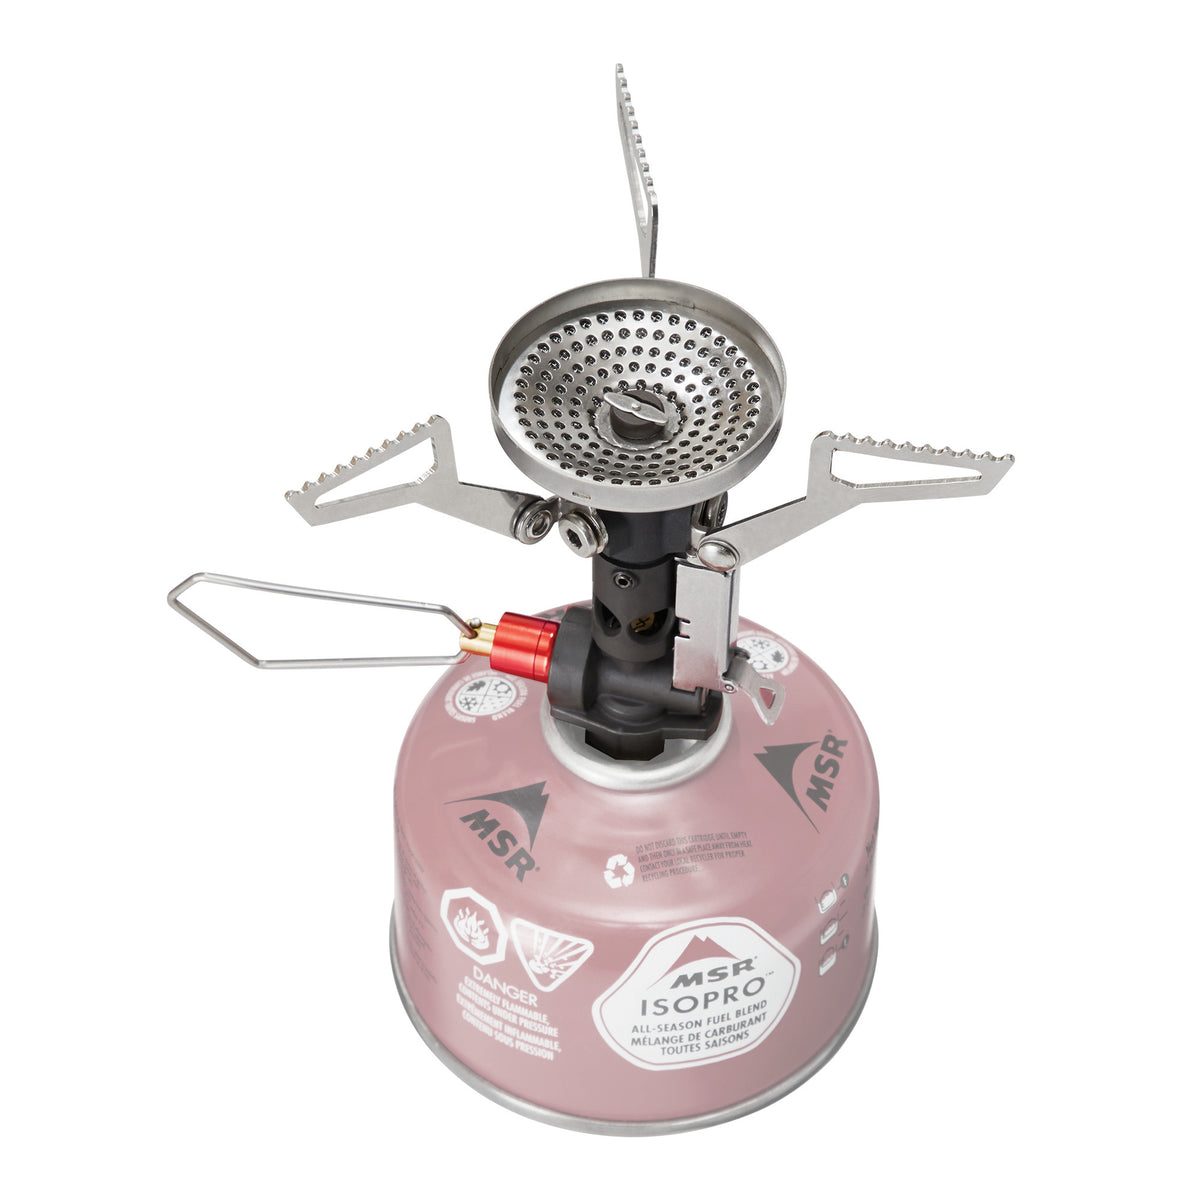 MSR Pocket Rocket Deluxe camping stove, as seen from above